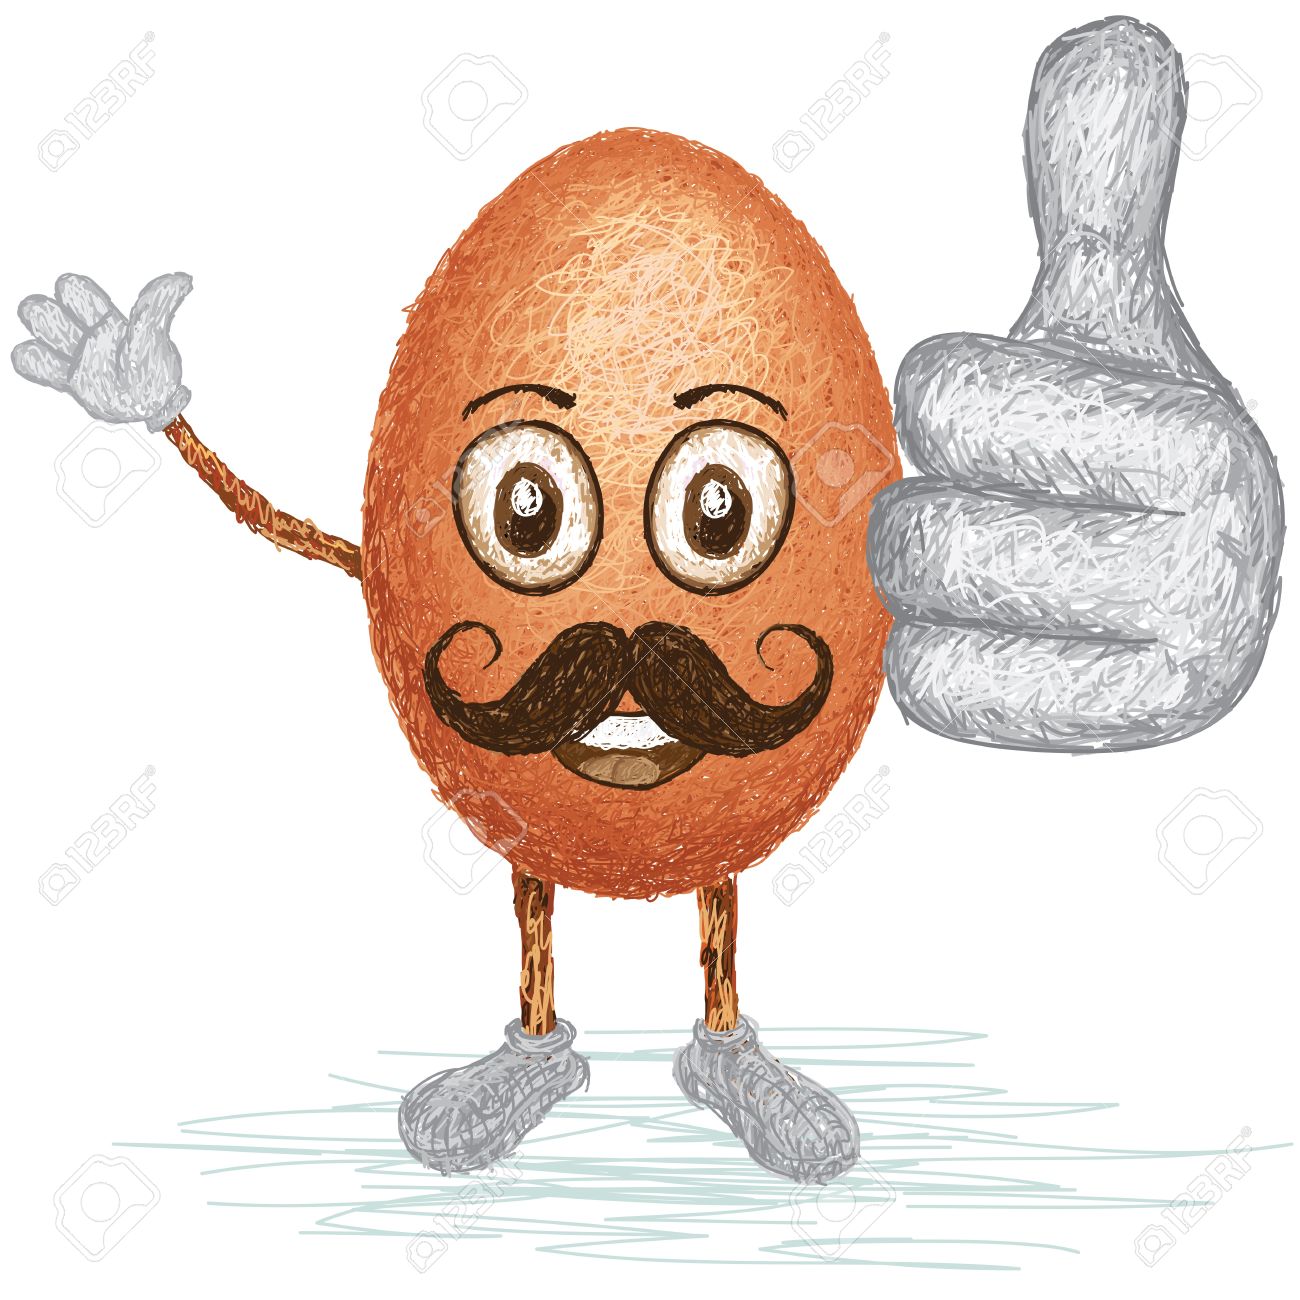 Mustaches Egg Cartoon Showing Thumb Funny Image